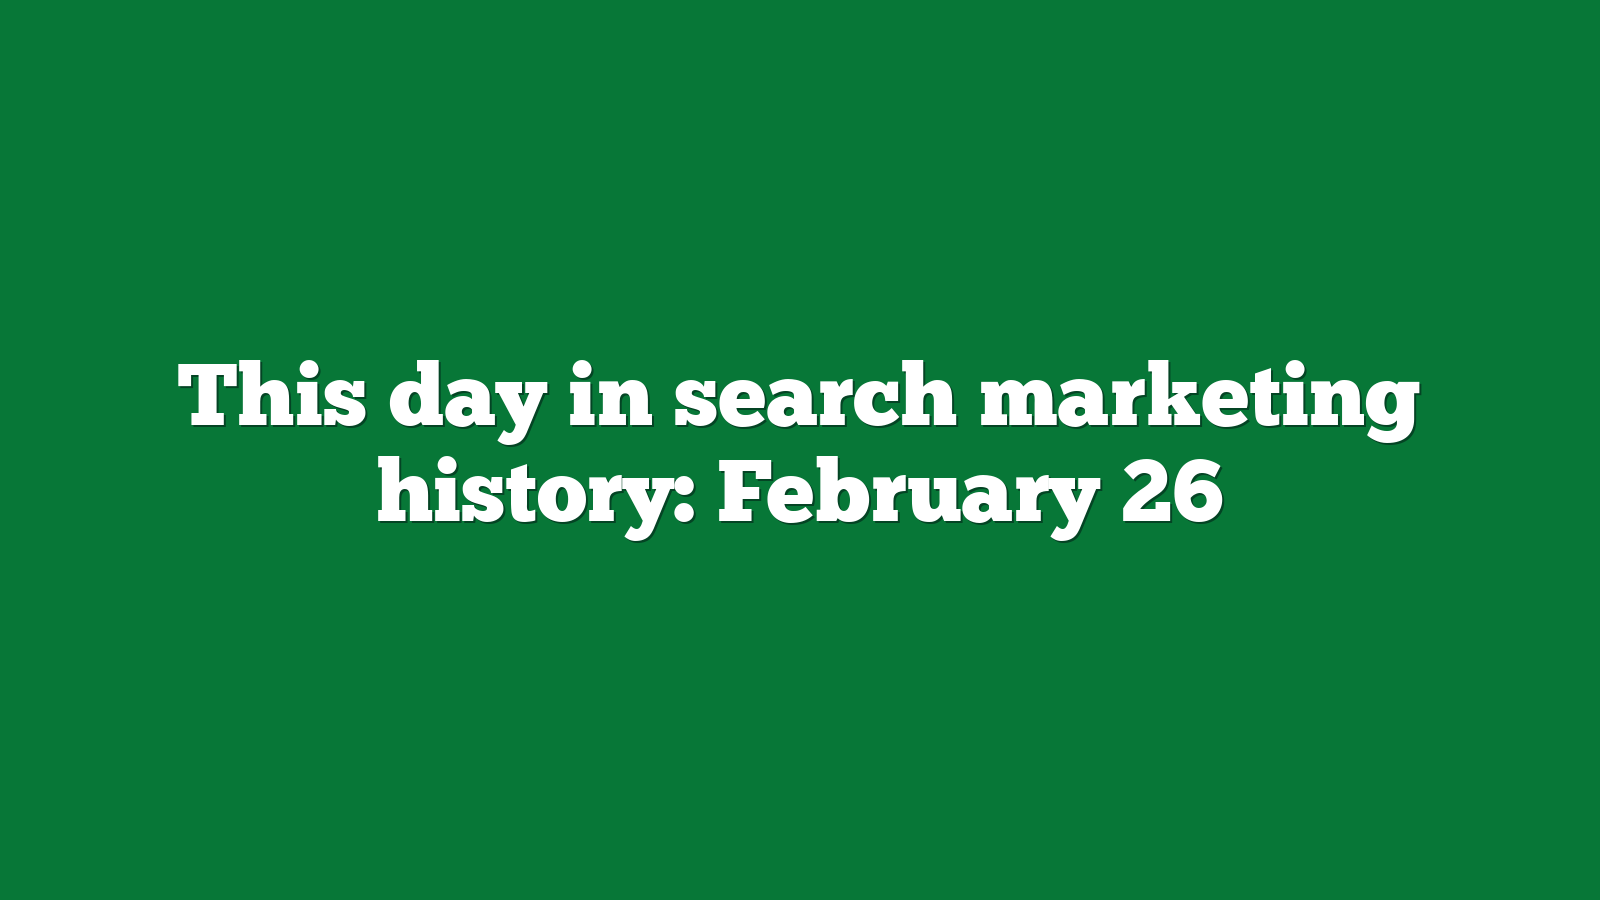 This day in search marketing history: February 26